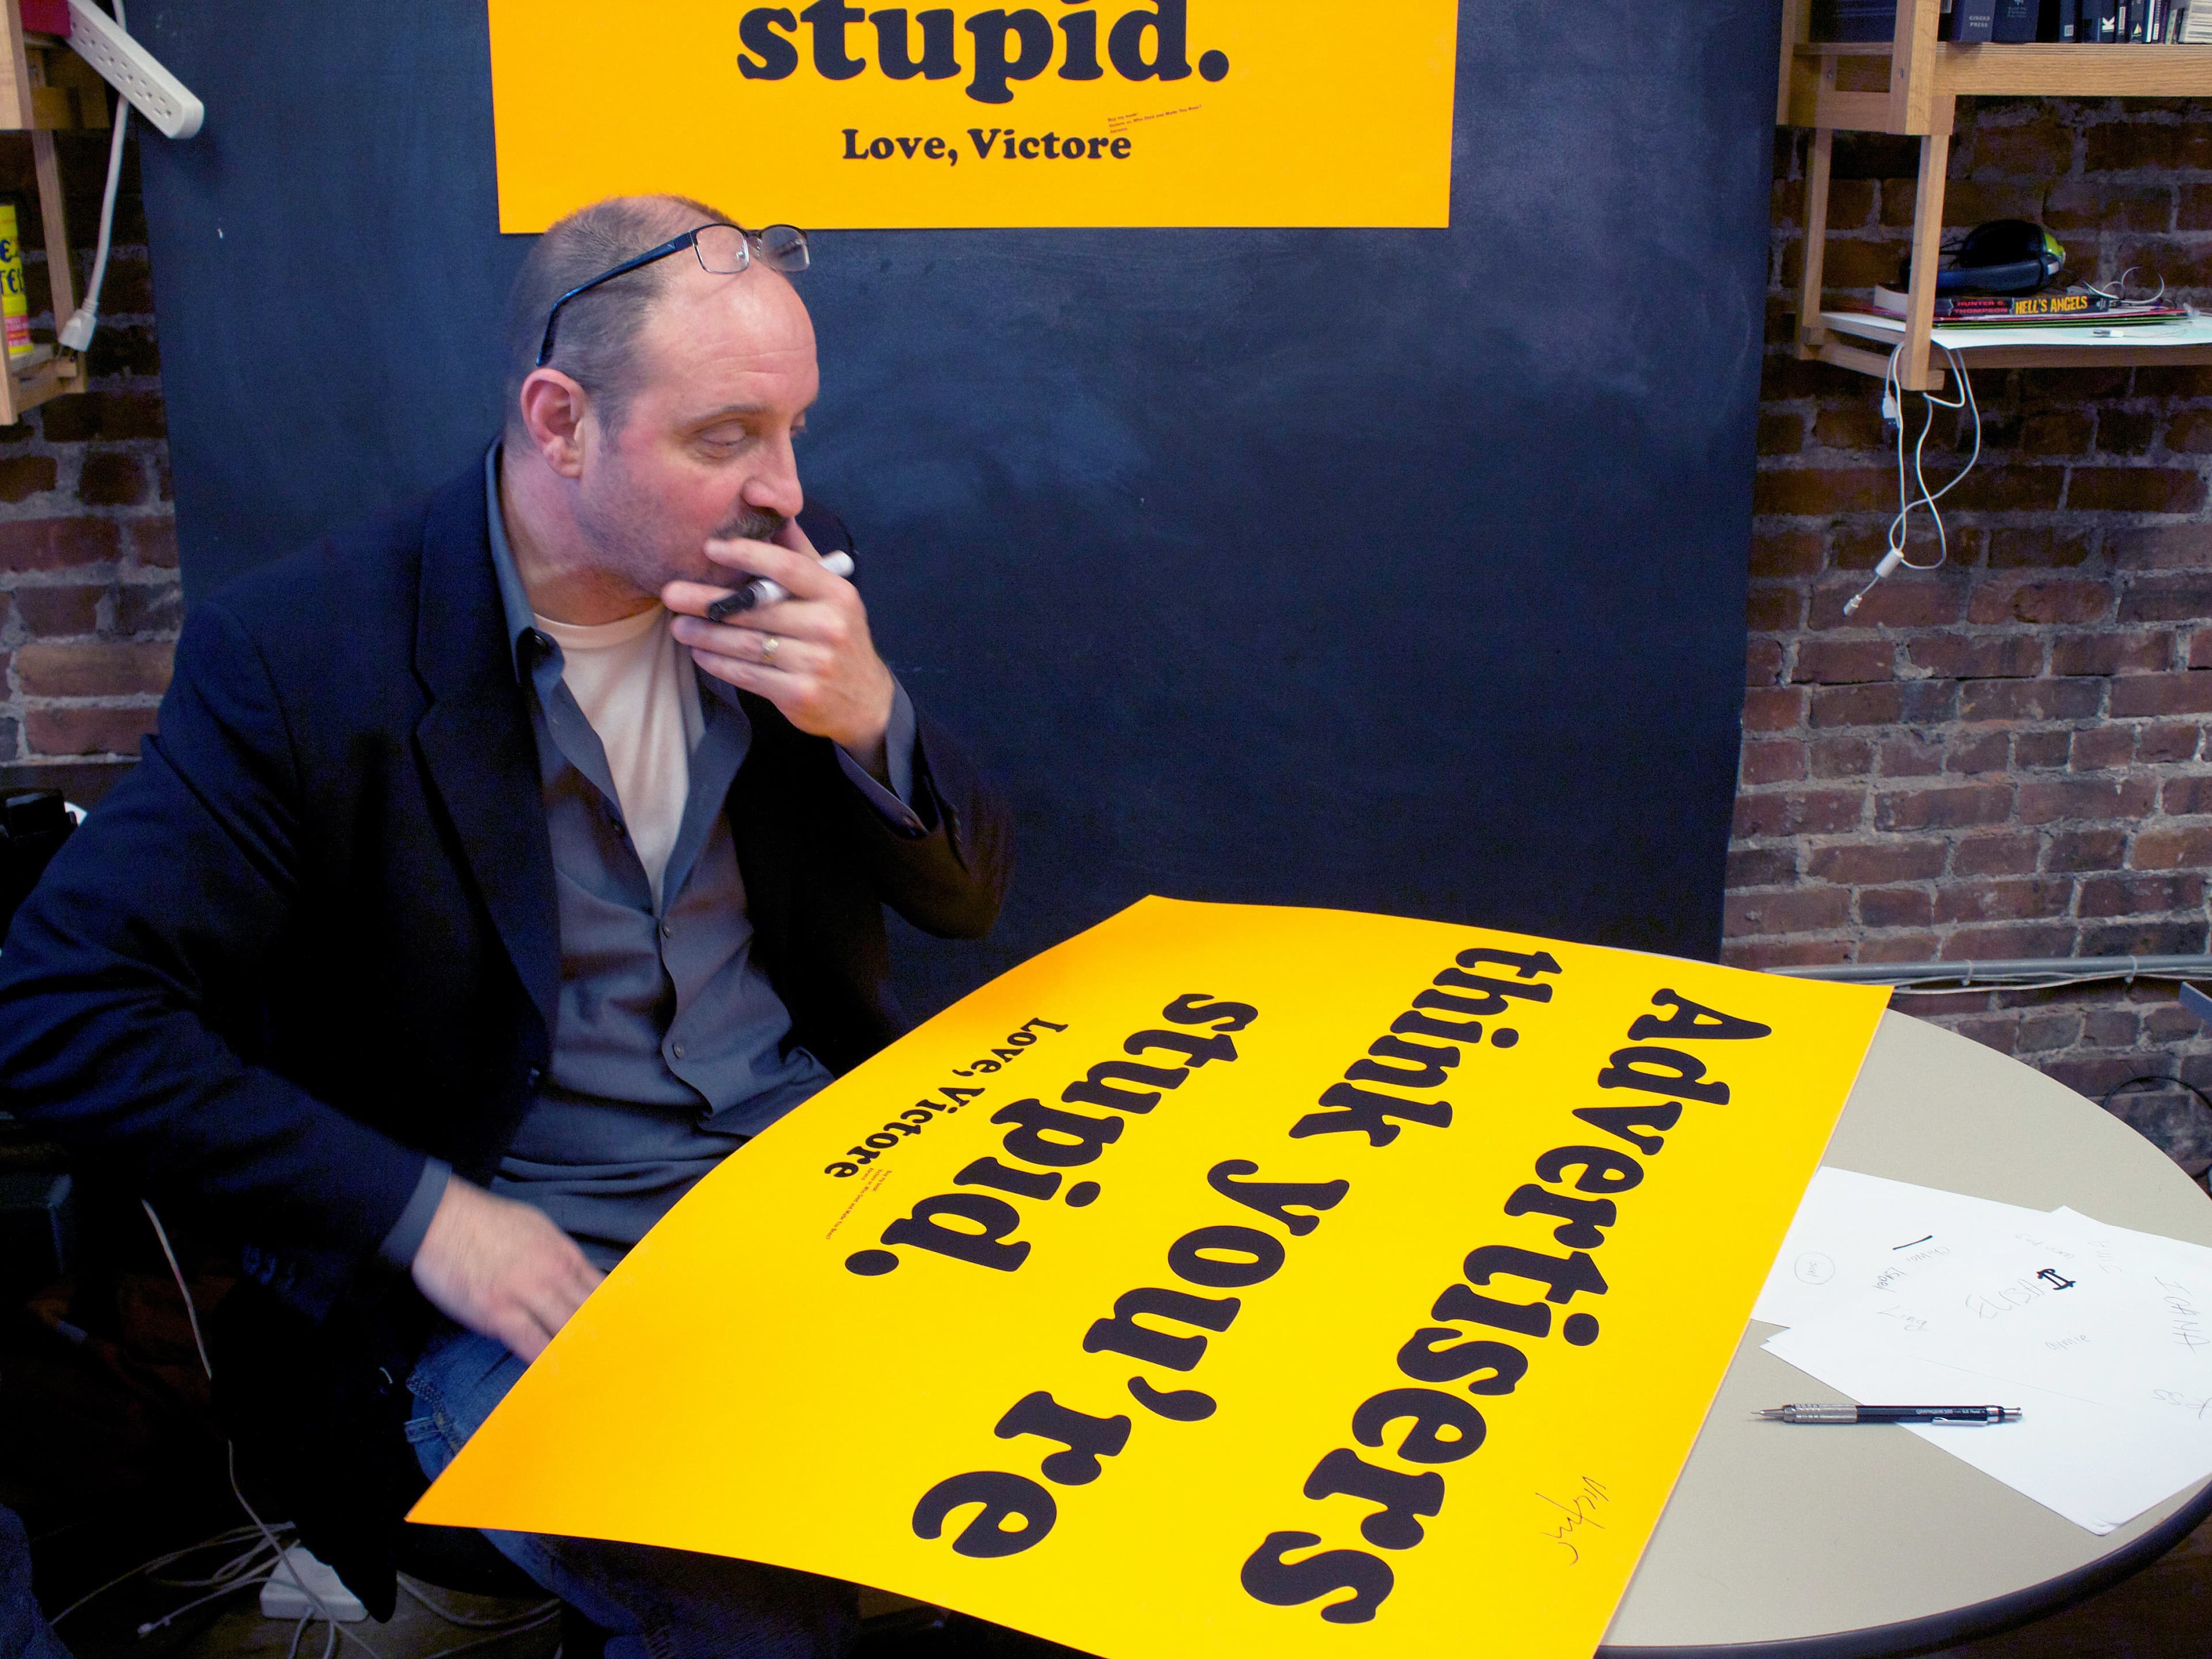 A man sits at a table and holds a marker to his mouth while looking at a large yellow poster with black text that reads, "Advertisers think you're stupid. Love, Victore." A second yellow poster with the same message is displayed on a blackboard behind him.